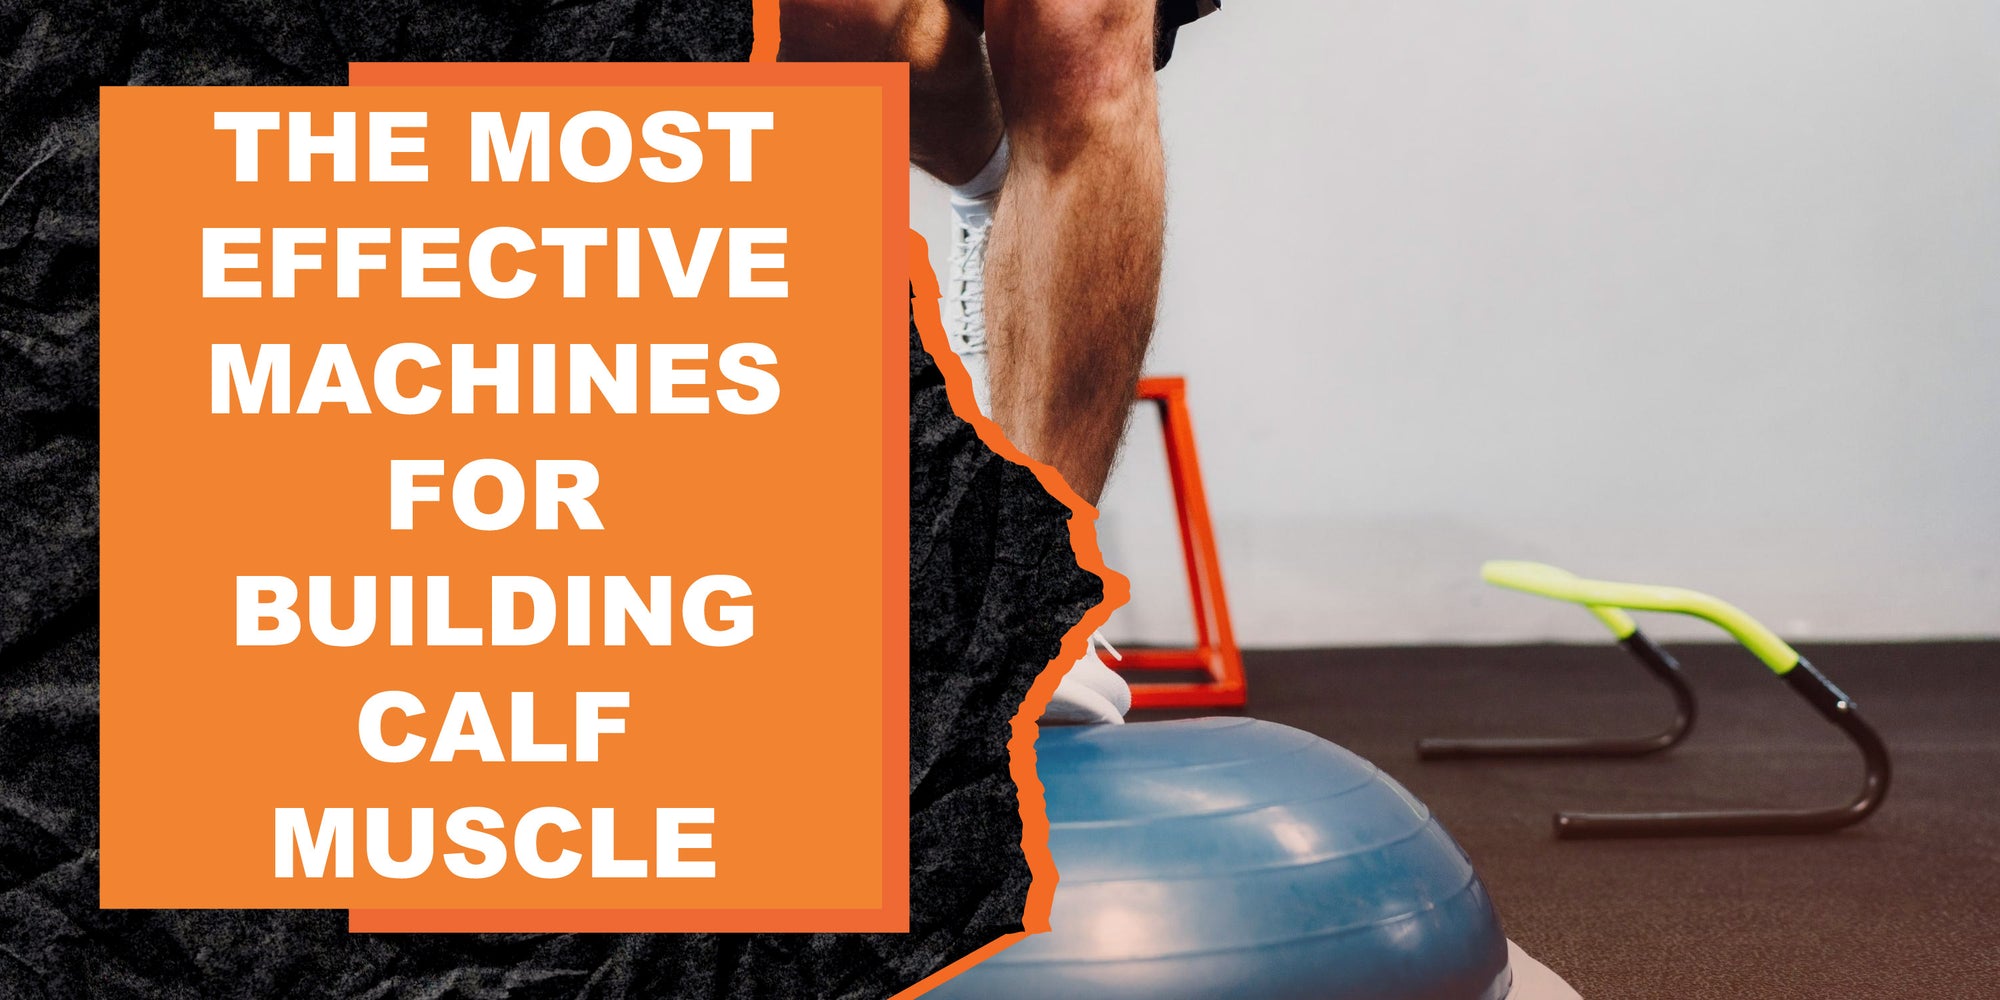 The Most Effective Machines for Building Calf Muscle